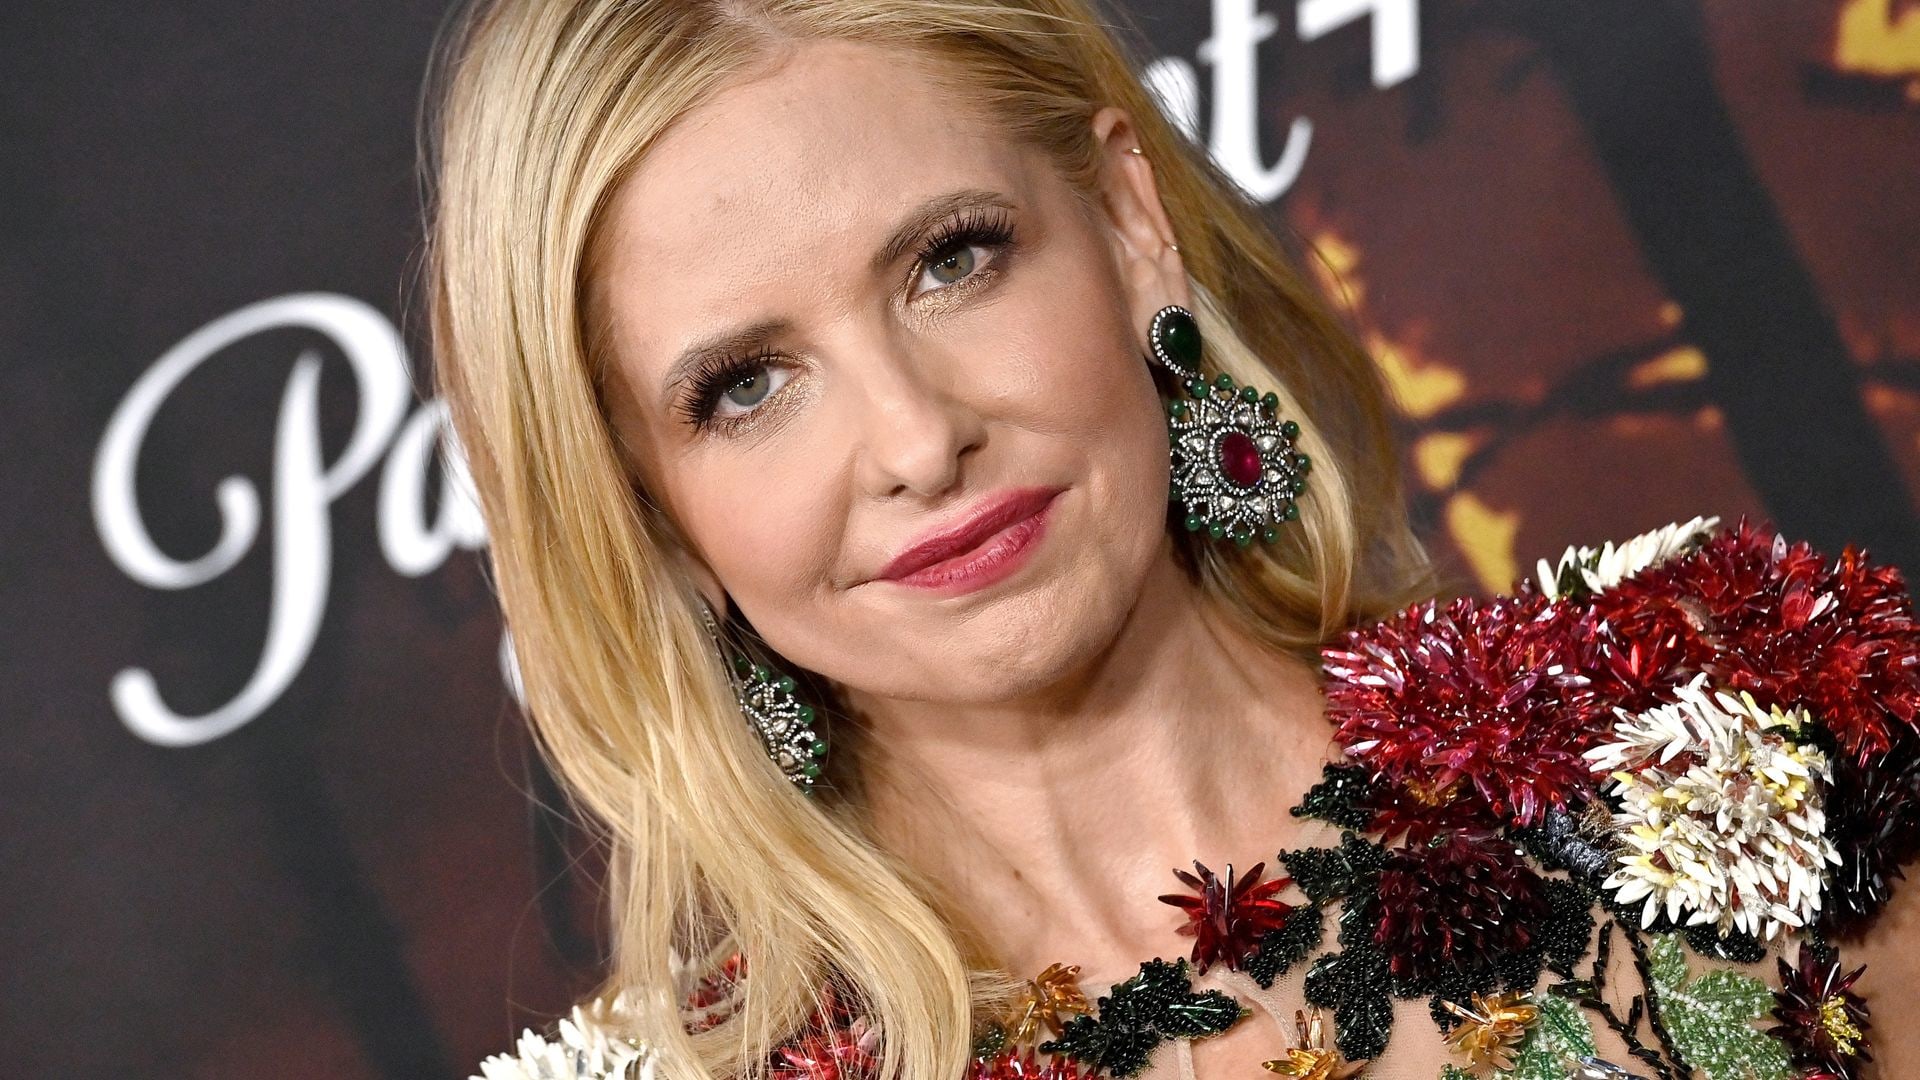 Sarah Michelle Gellar attends the Los Angeles Premiere of Paramount+'s  "Wolf Pack" at Harmony Gold on January 19, 2023